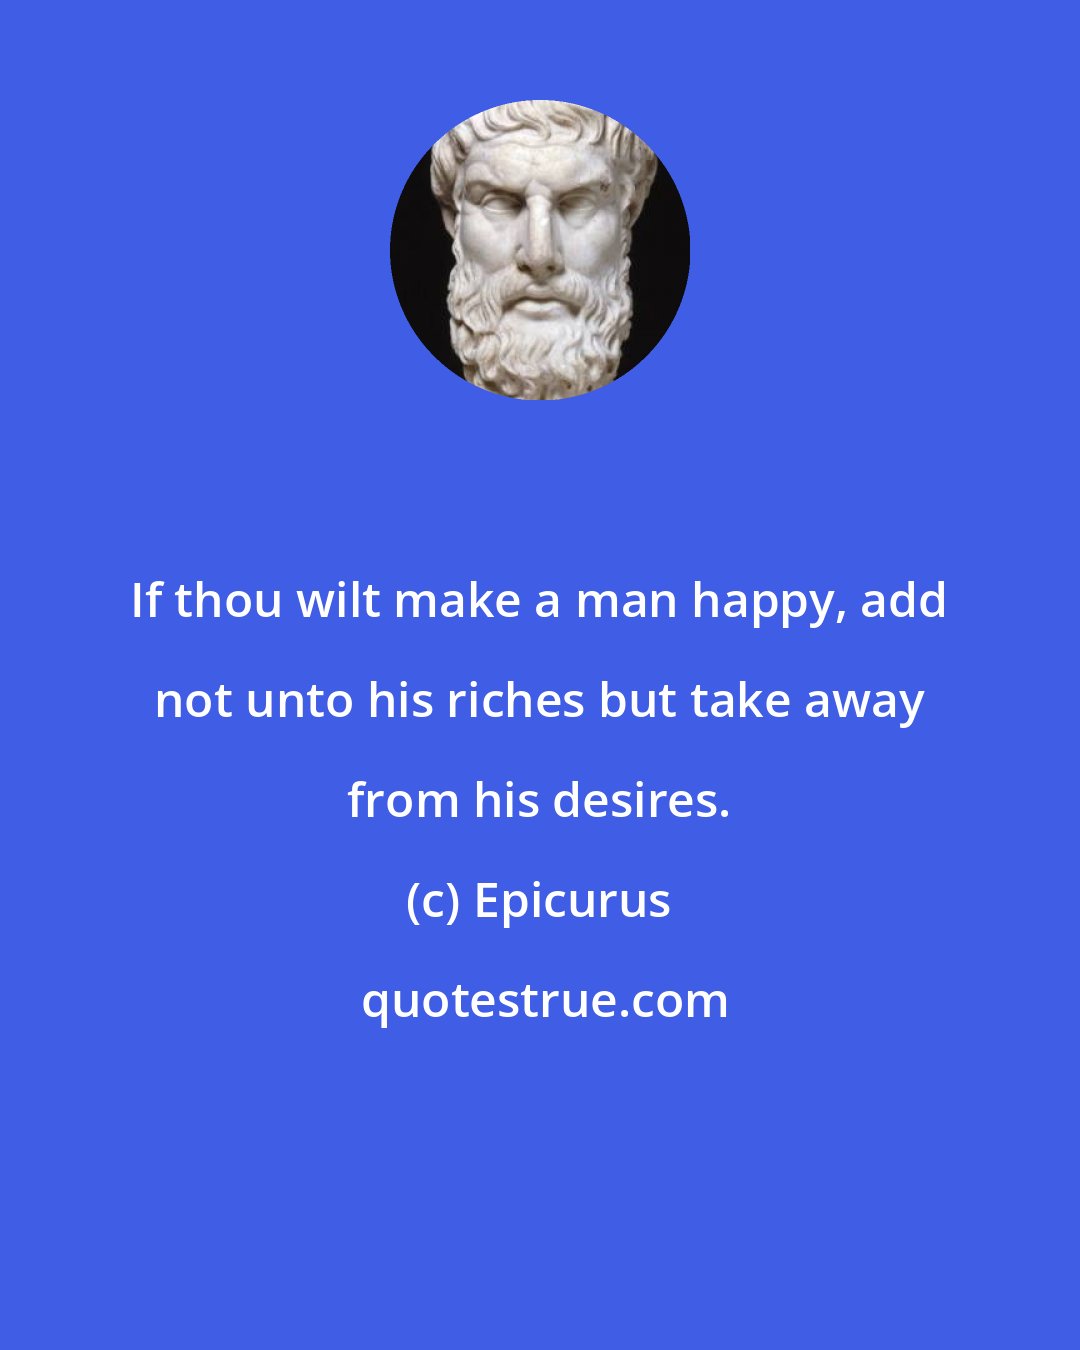 Epicurus: If thou wilt make a man happy, add not unto his riches but take away from his desires.